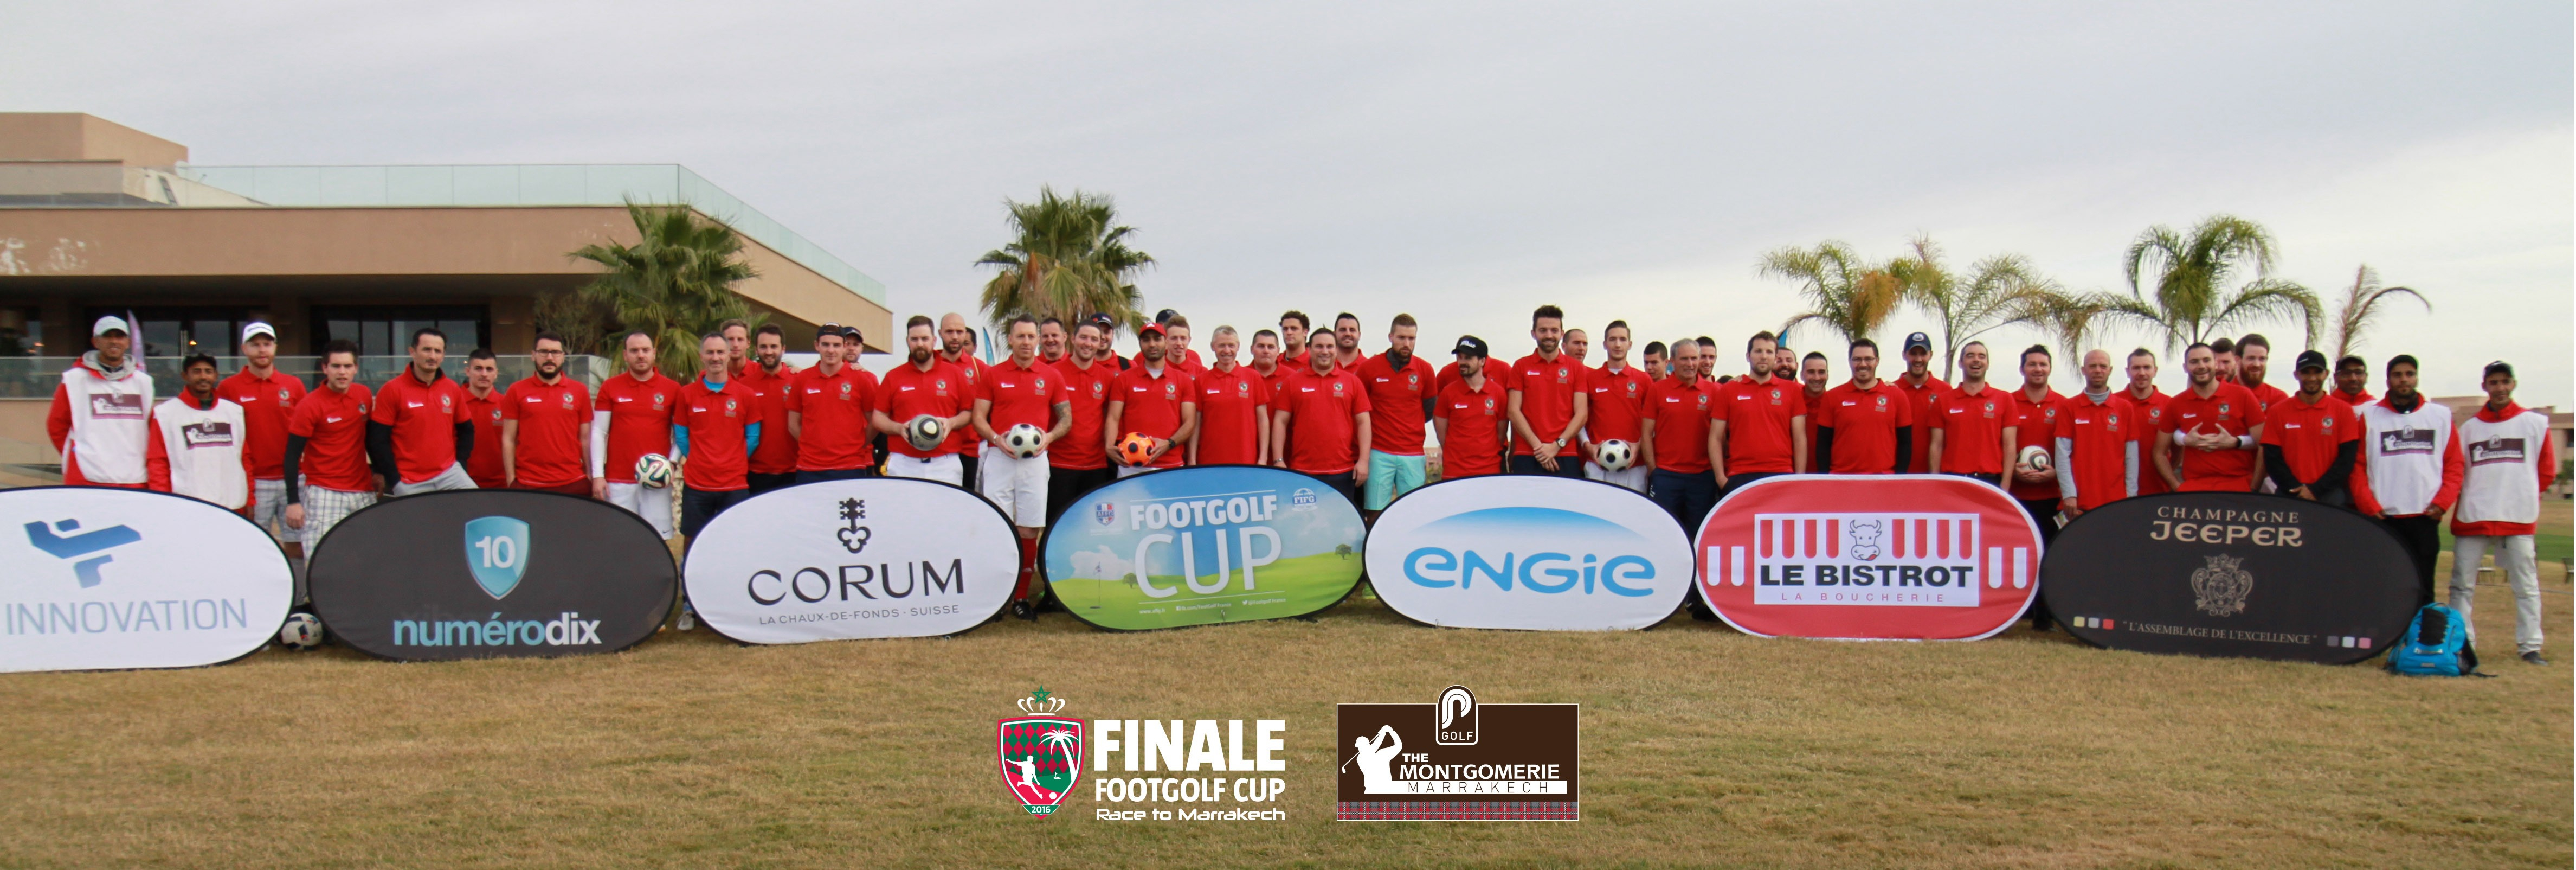 Finale-footgolf-cup-2016